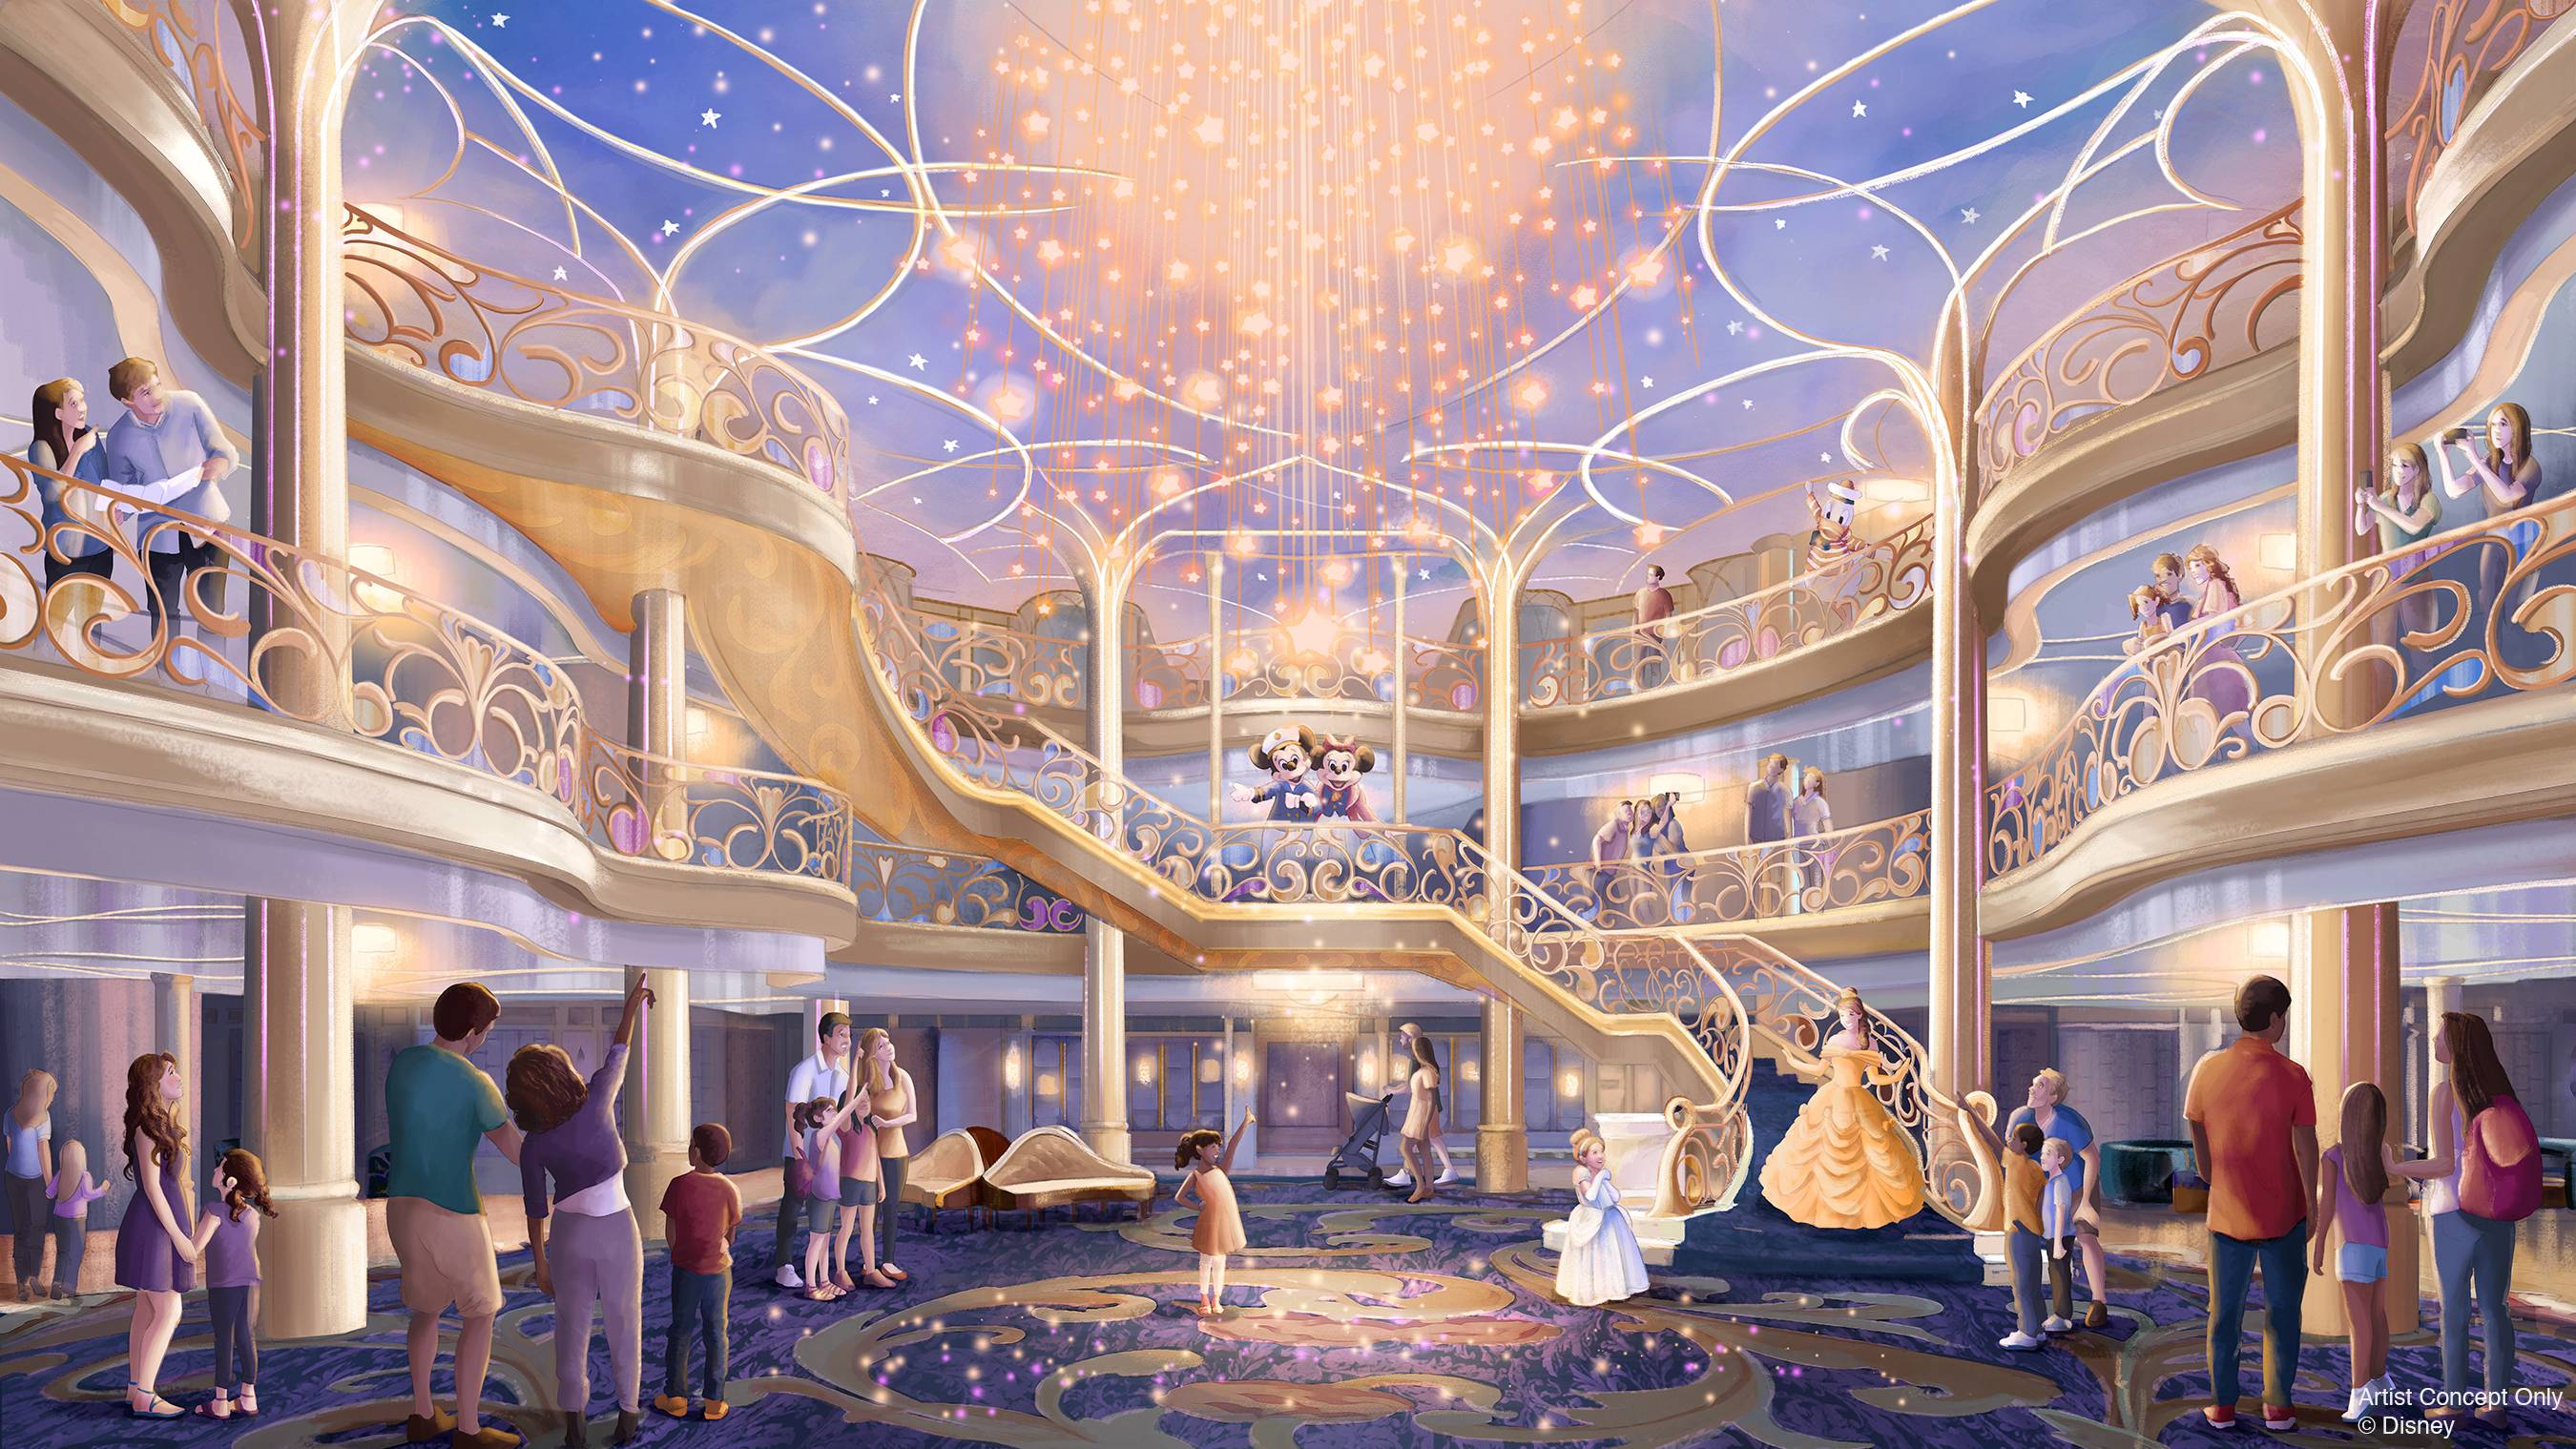 Disney shows off new concept art of 'The Grand Hall' aboard the Disney Wish